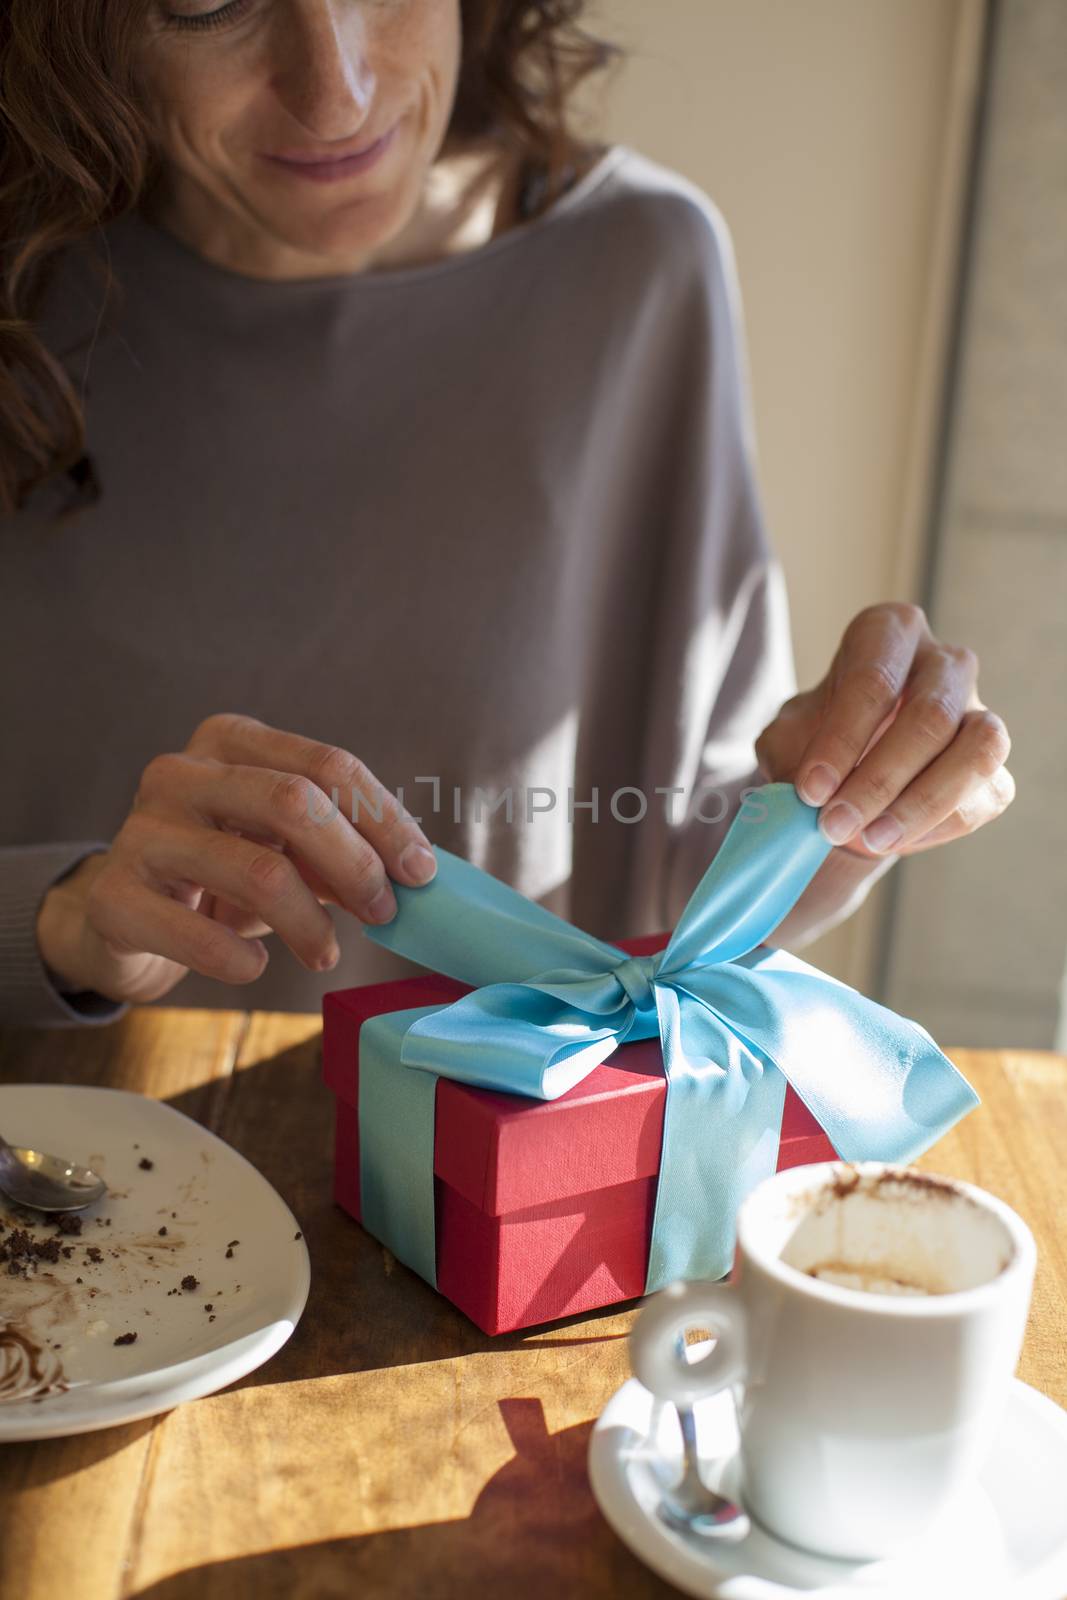 woman open red and blue gift box on light brown wooden table with white small cup cappuccino coffee and chocolate cake dish